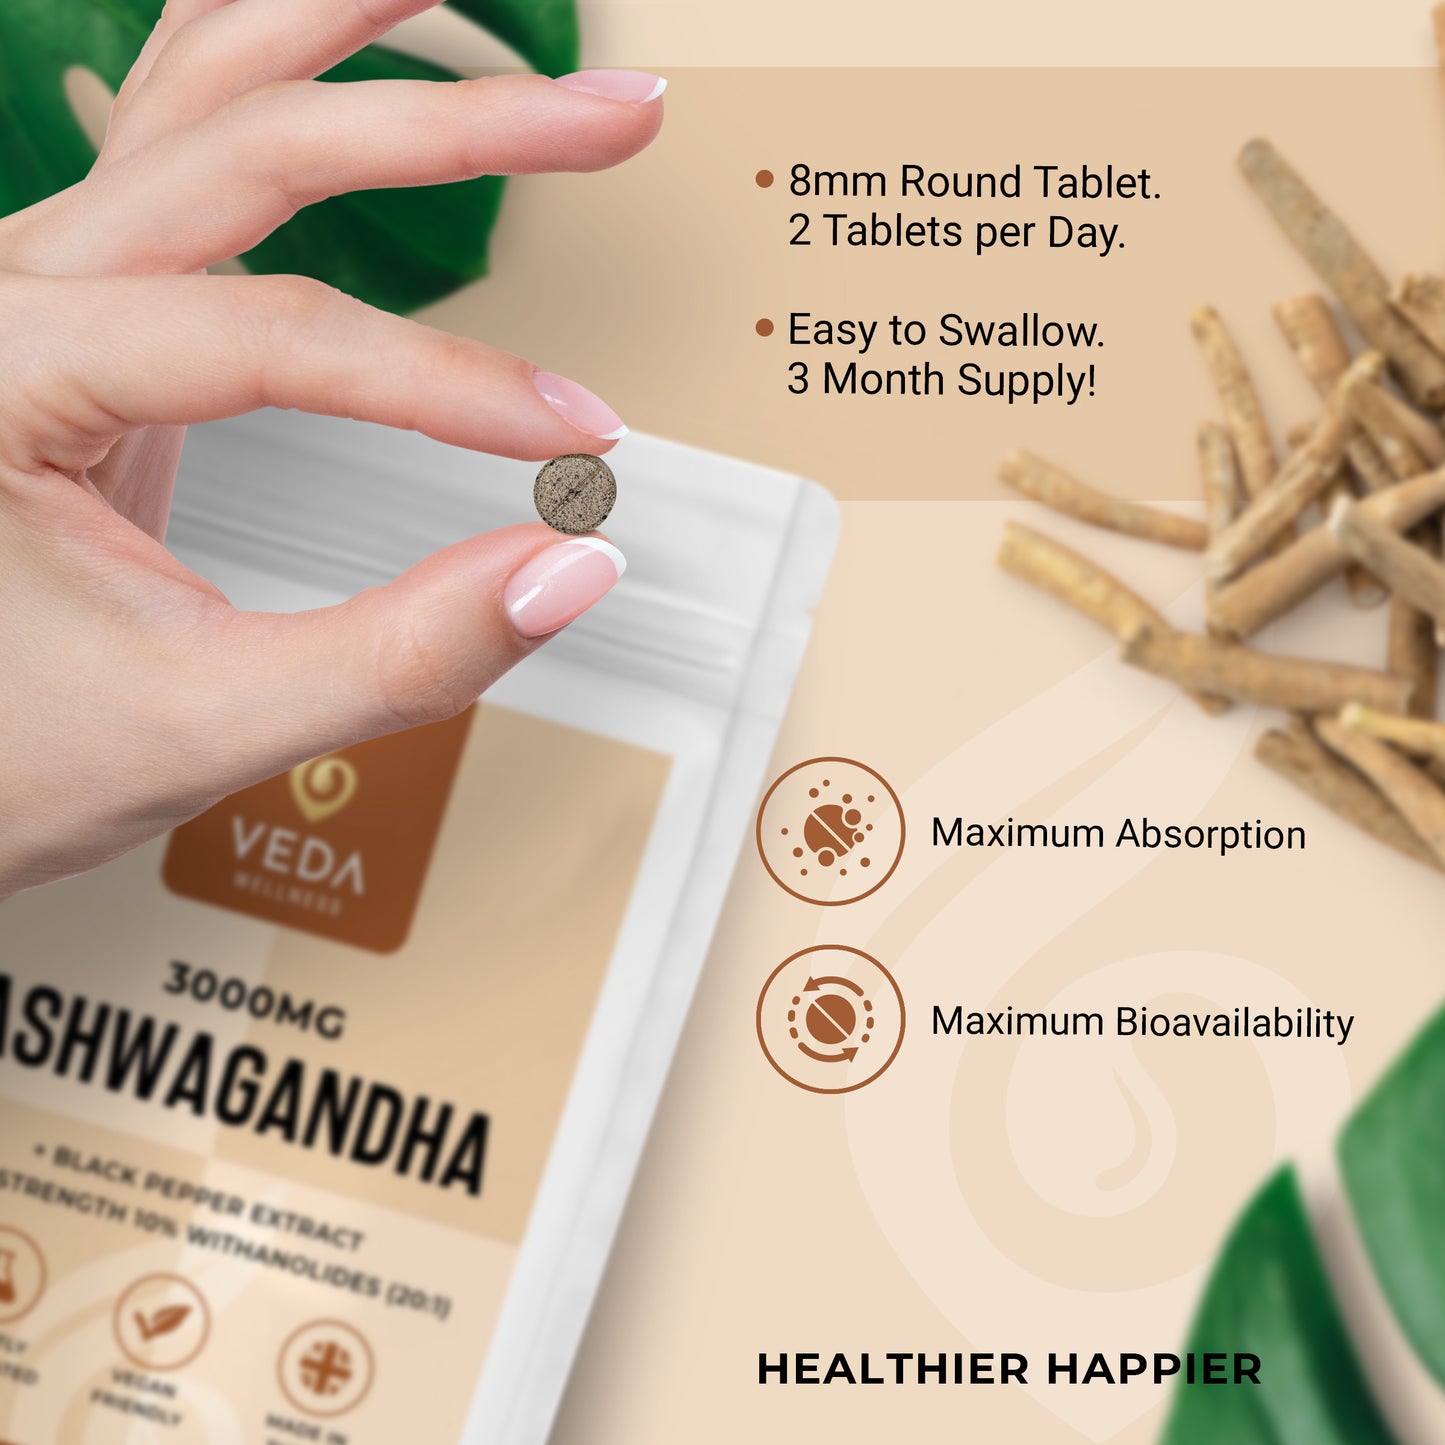 Pure Ashwagandha Extract 3000mg - 180 Vegan Tablets + Black Pepper. Made in UK.